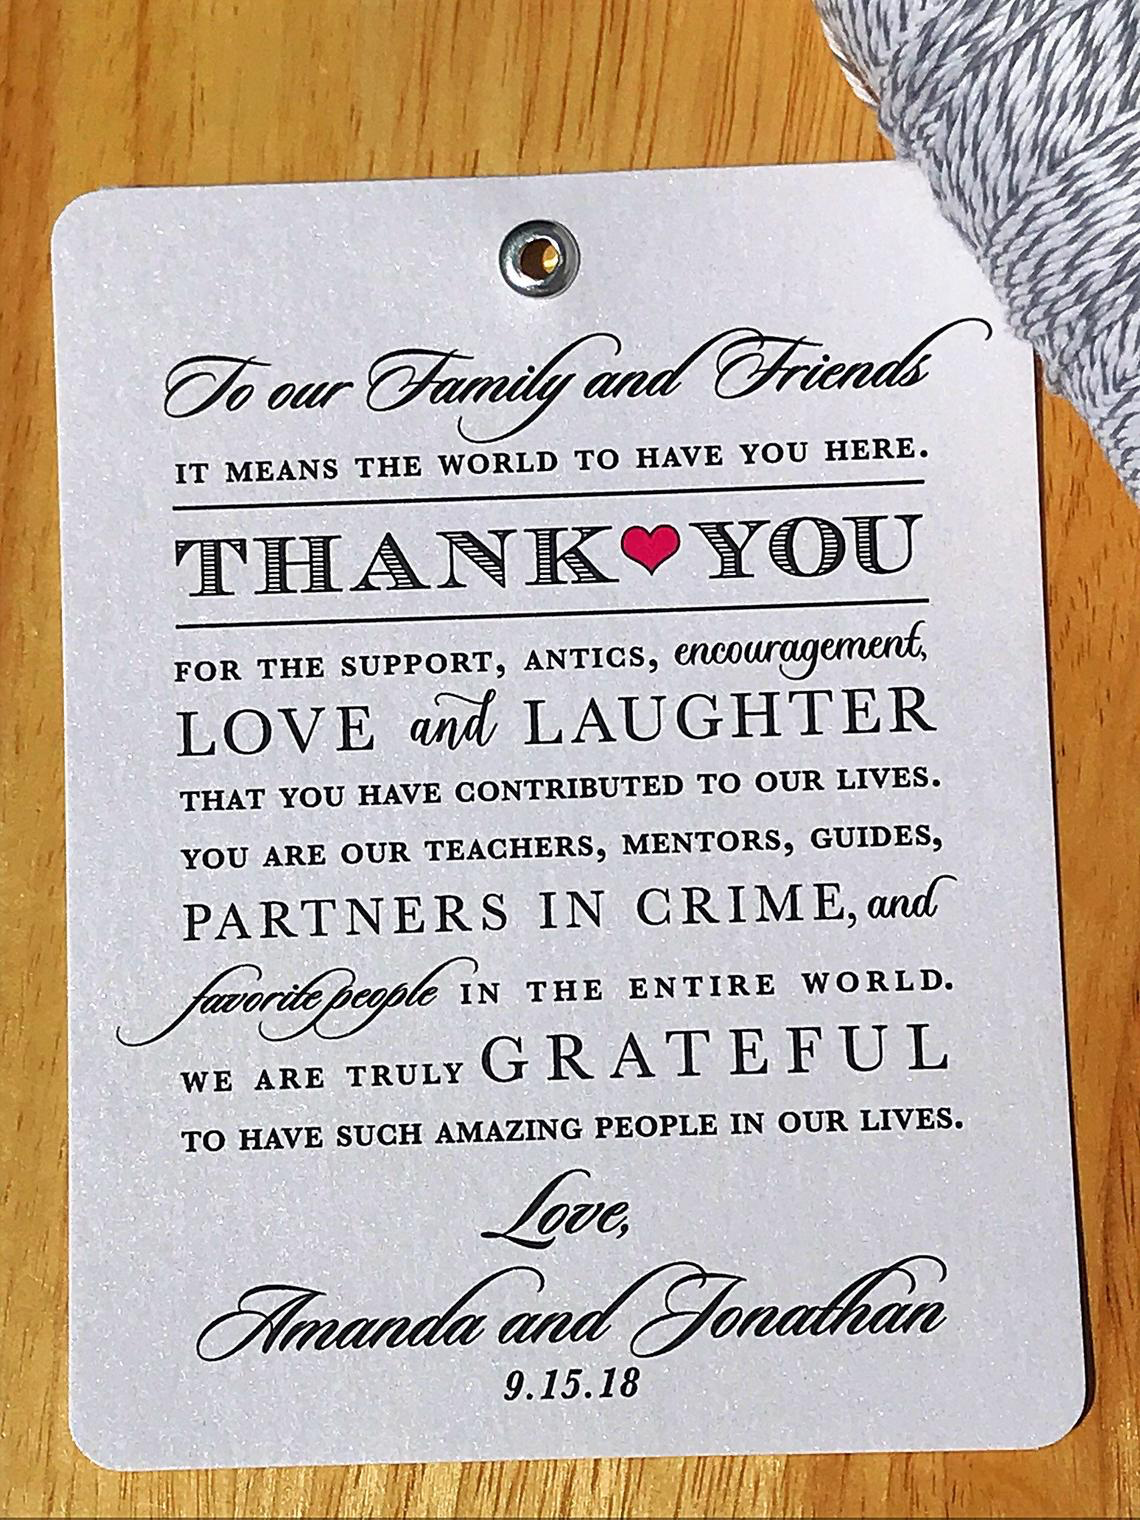 Wedding Tags-Thank You Tags-Guest Bag Tags – Poetic Twist